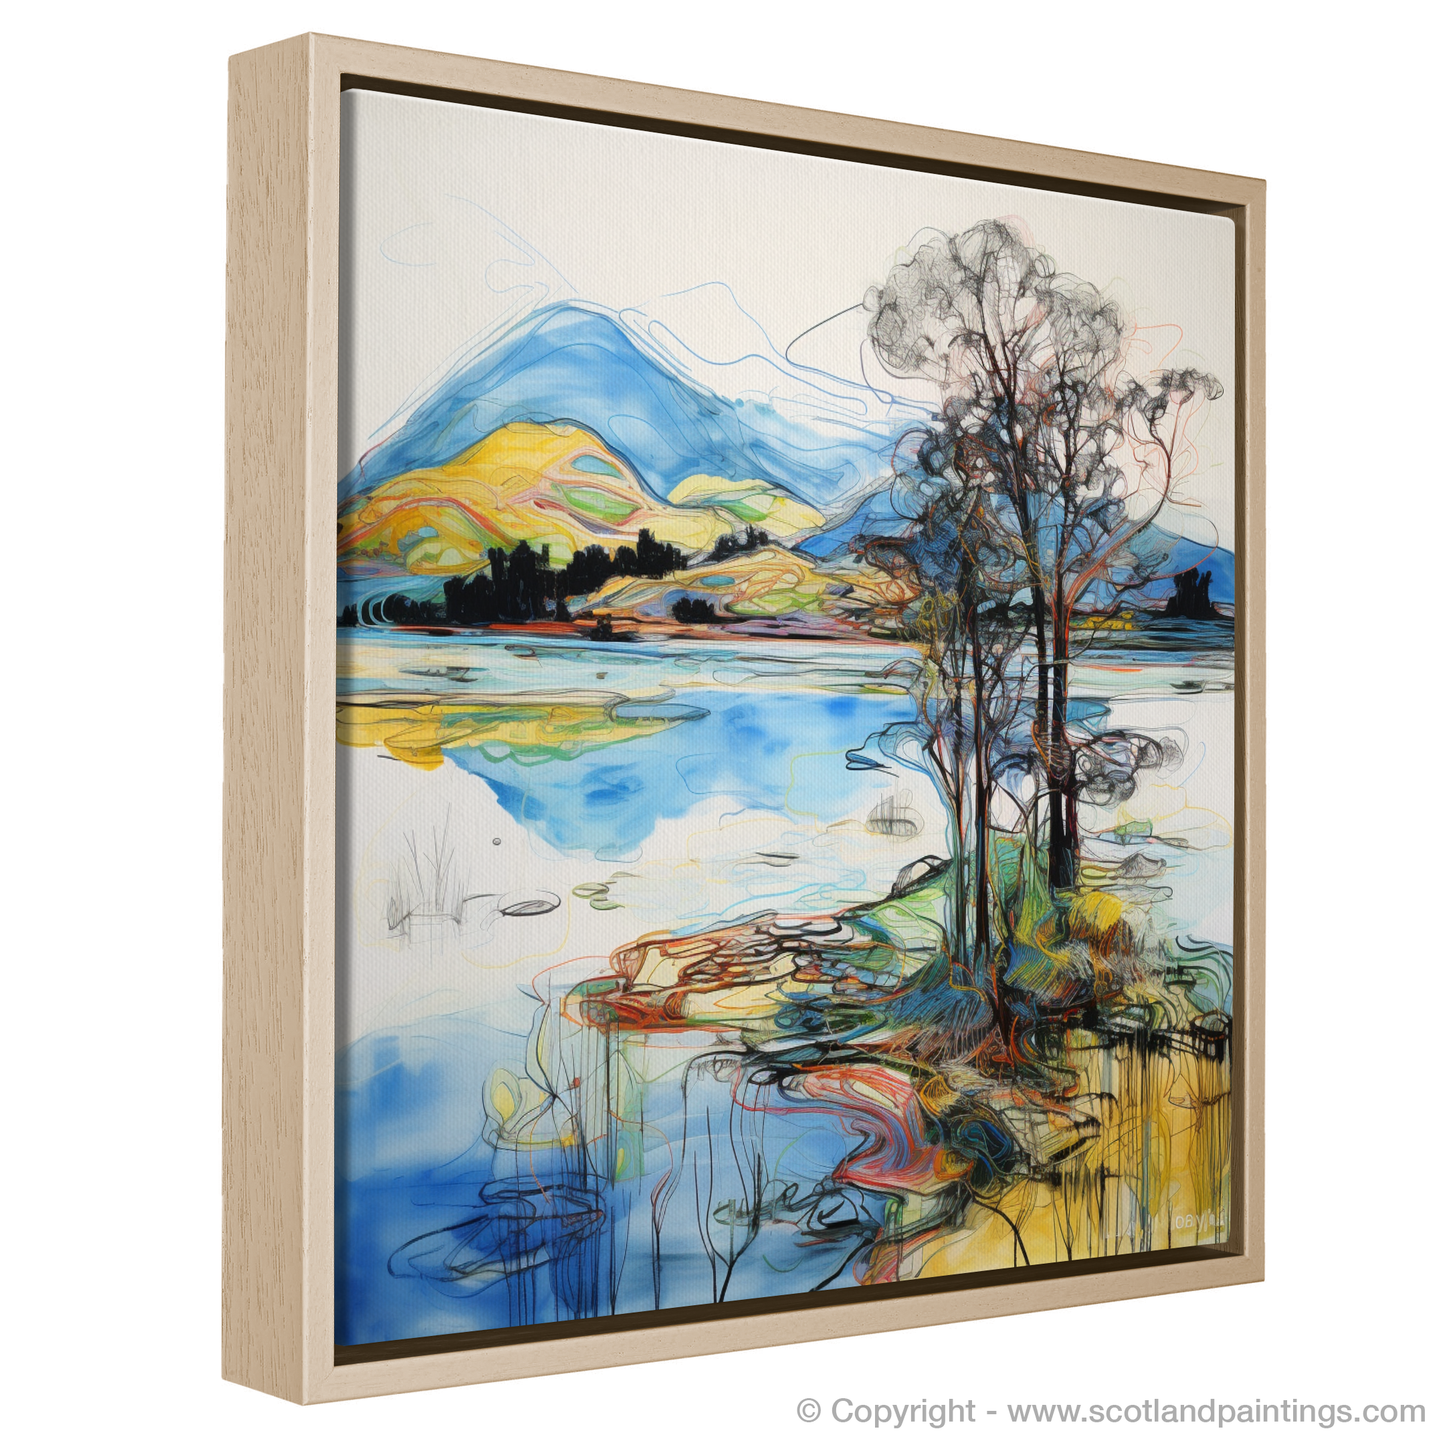 Painting and Art Print of Loch Awe entitled "Contemporary Visions of Loch Awe".